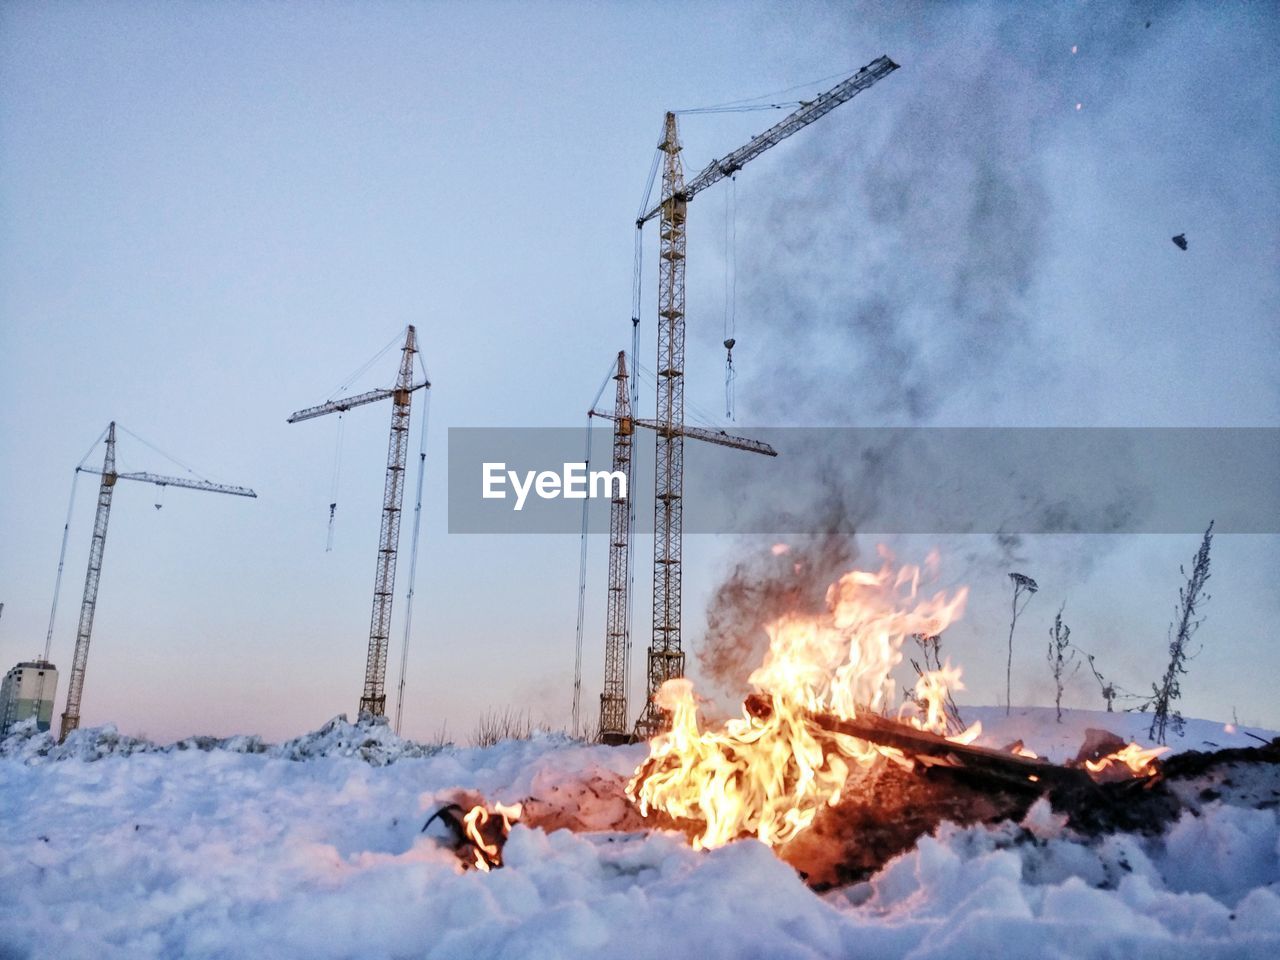 VIEW OF BONFIRE ON SNOW COVERED LAND